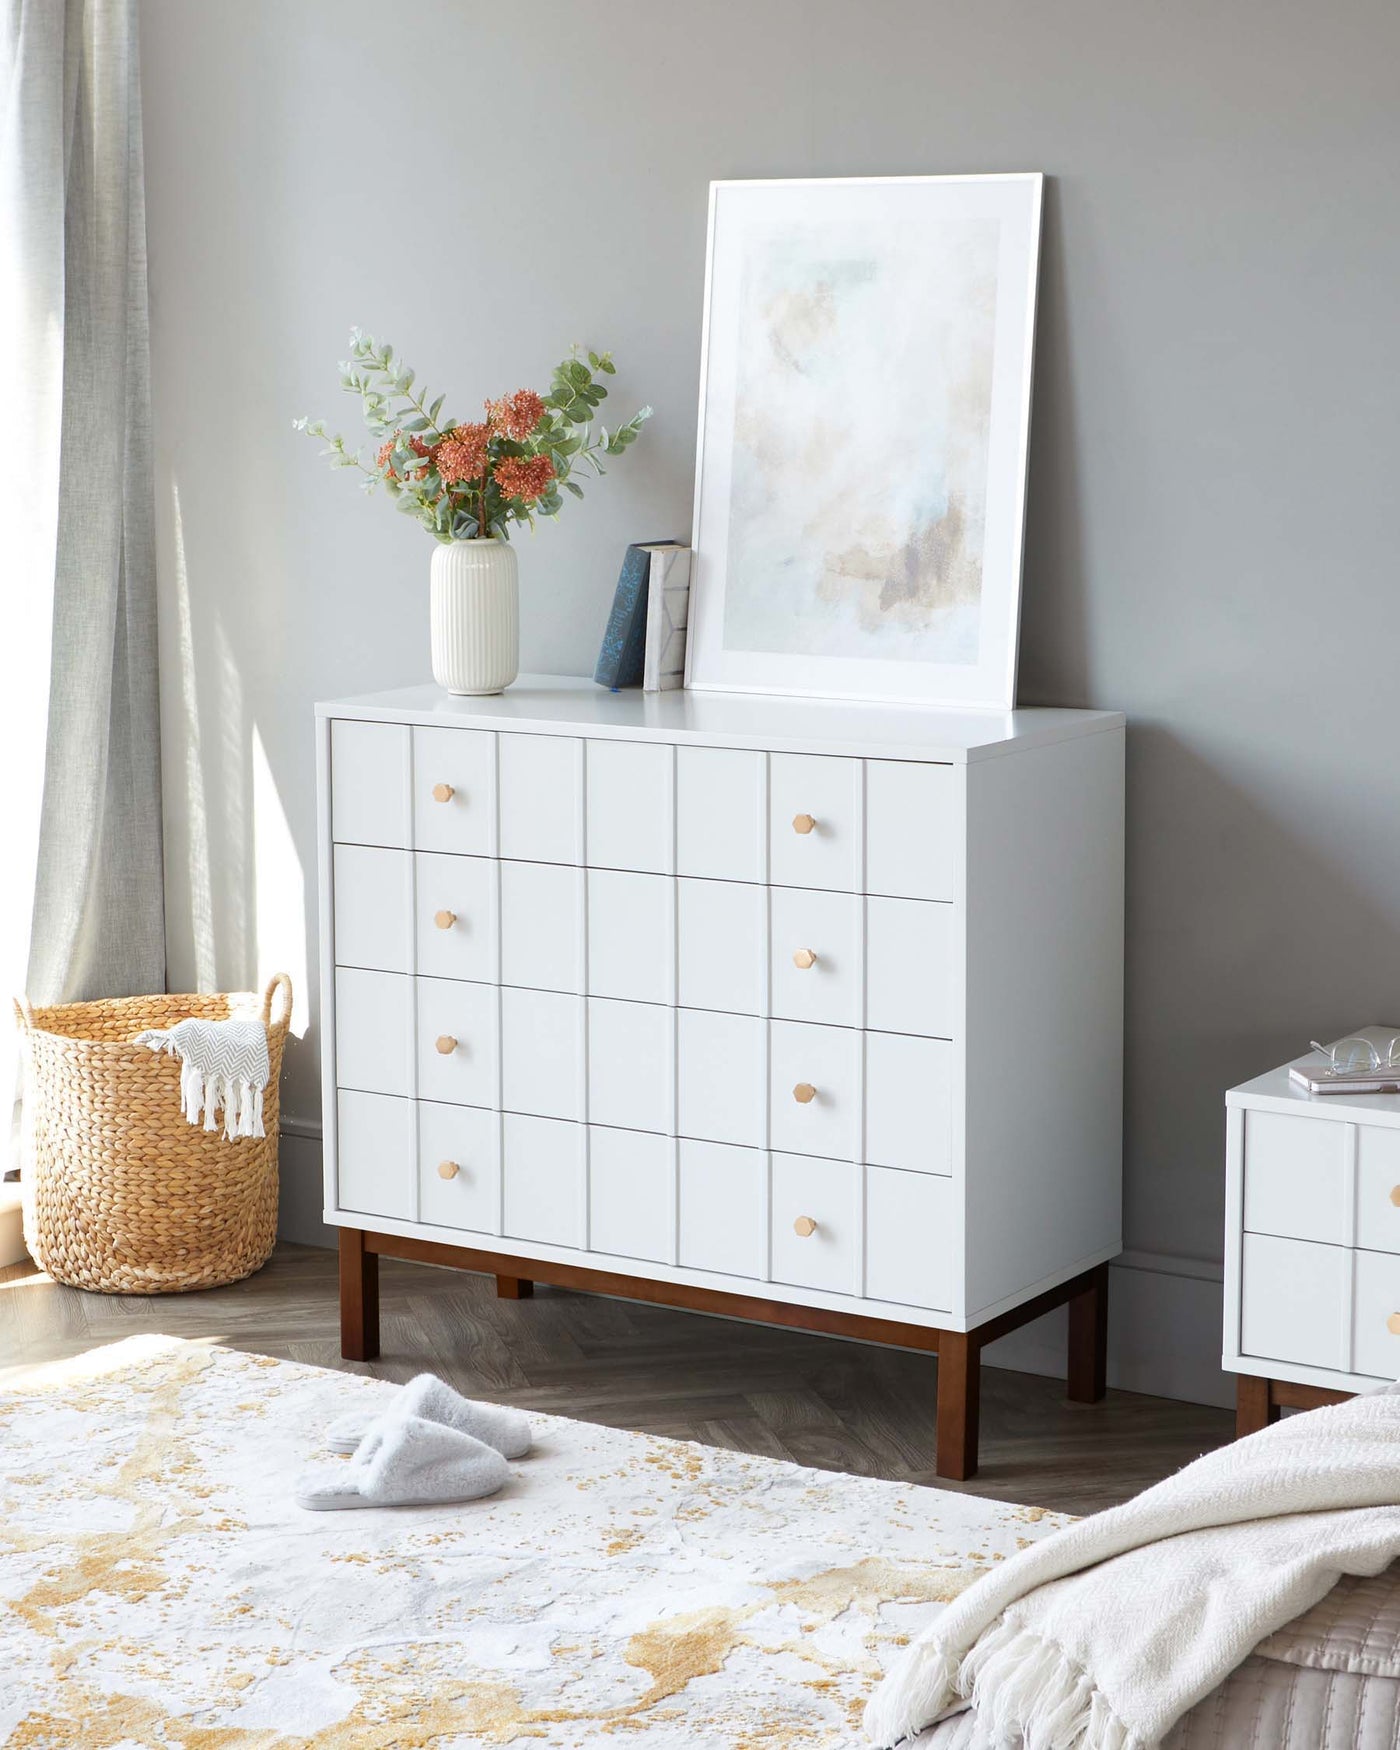 A modern white dresser with multiple drawers and round wooden knobs, standing on a minimalistic wooden base frame. To the right is a smaller, matching white bedside table with three drawers and similar wooden knobs. Both pieces are part of a contemporary bedroom furniture set.